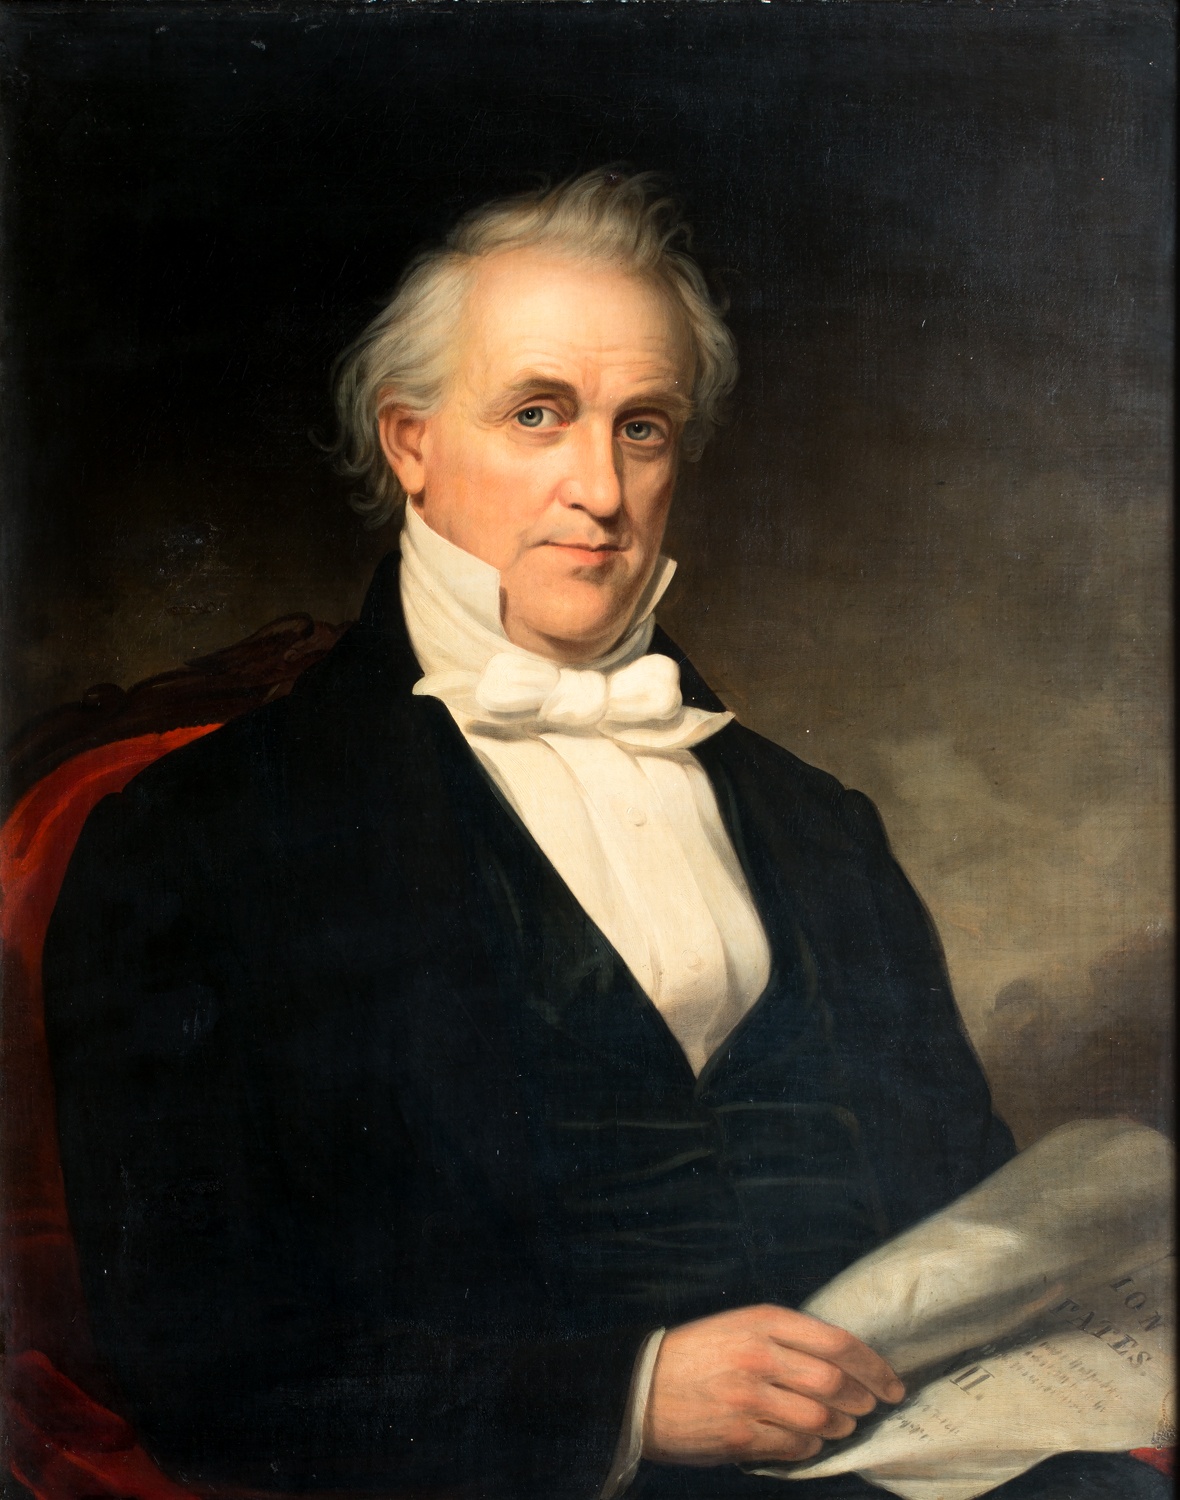 James Buchanan, the 15th President of the United States